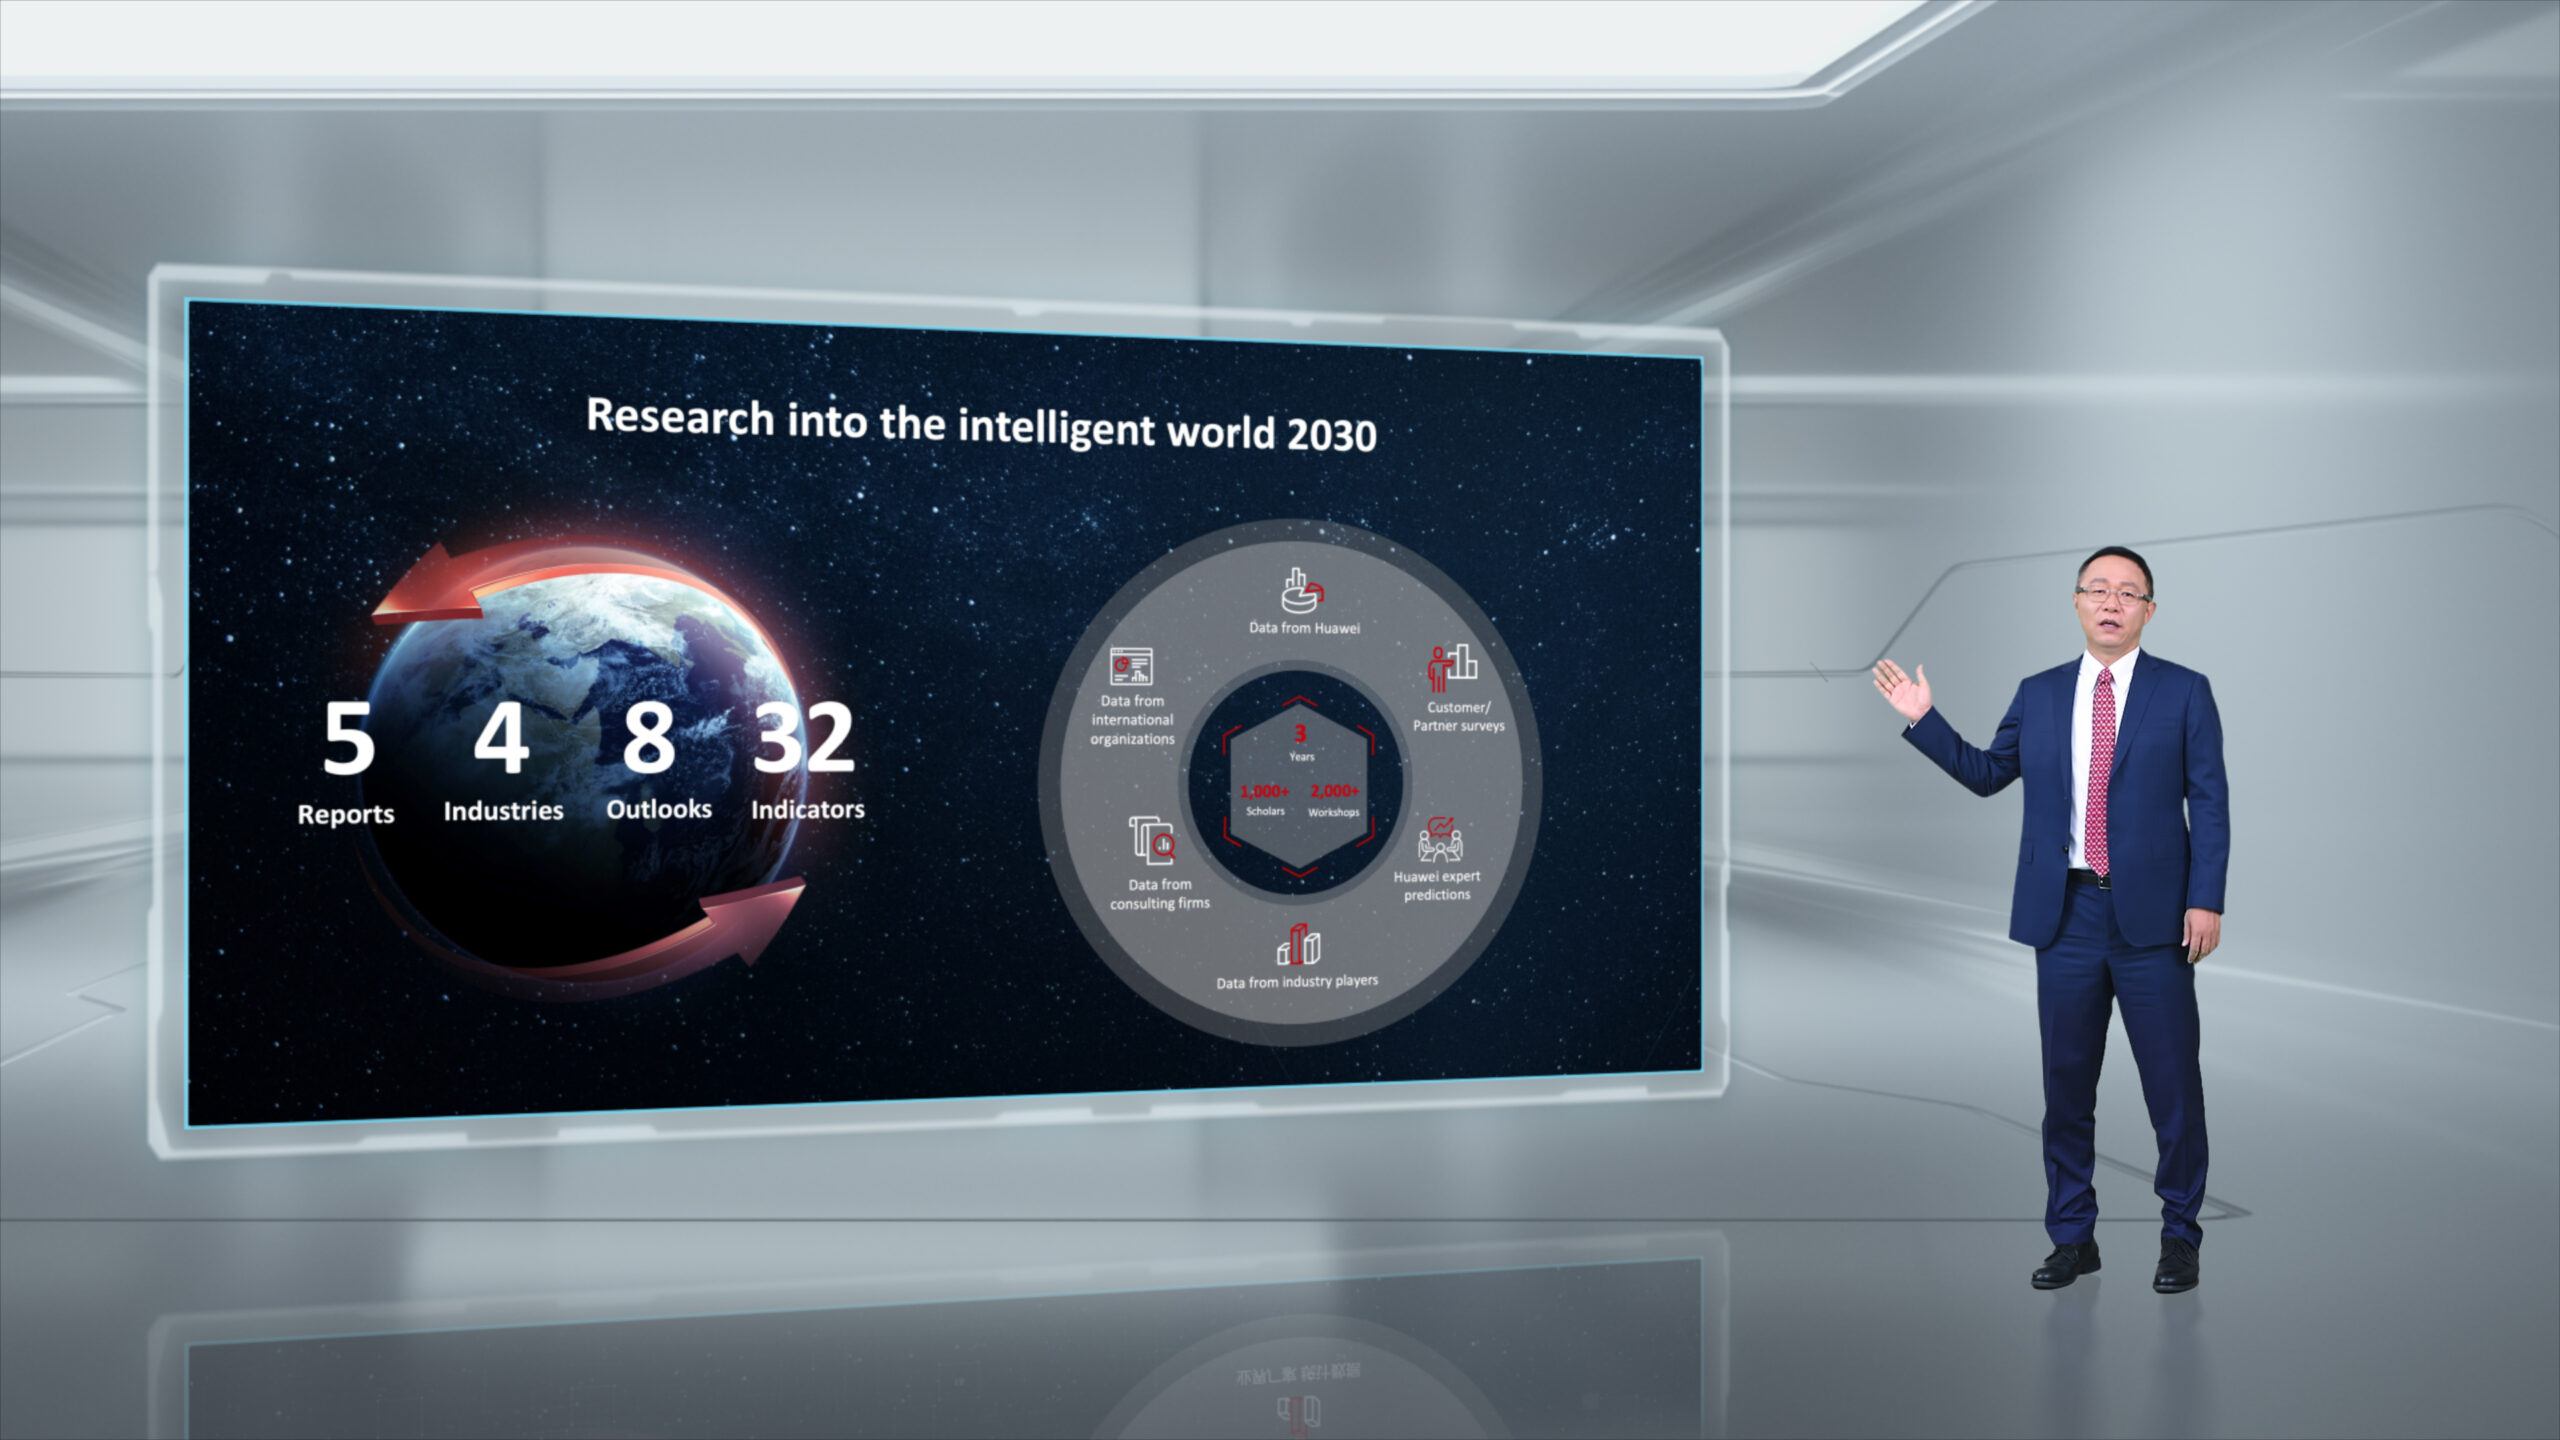 Huawei Releases the Intelligent World 2030 Report to Explore Trends in the Next Decade